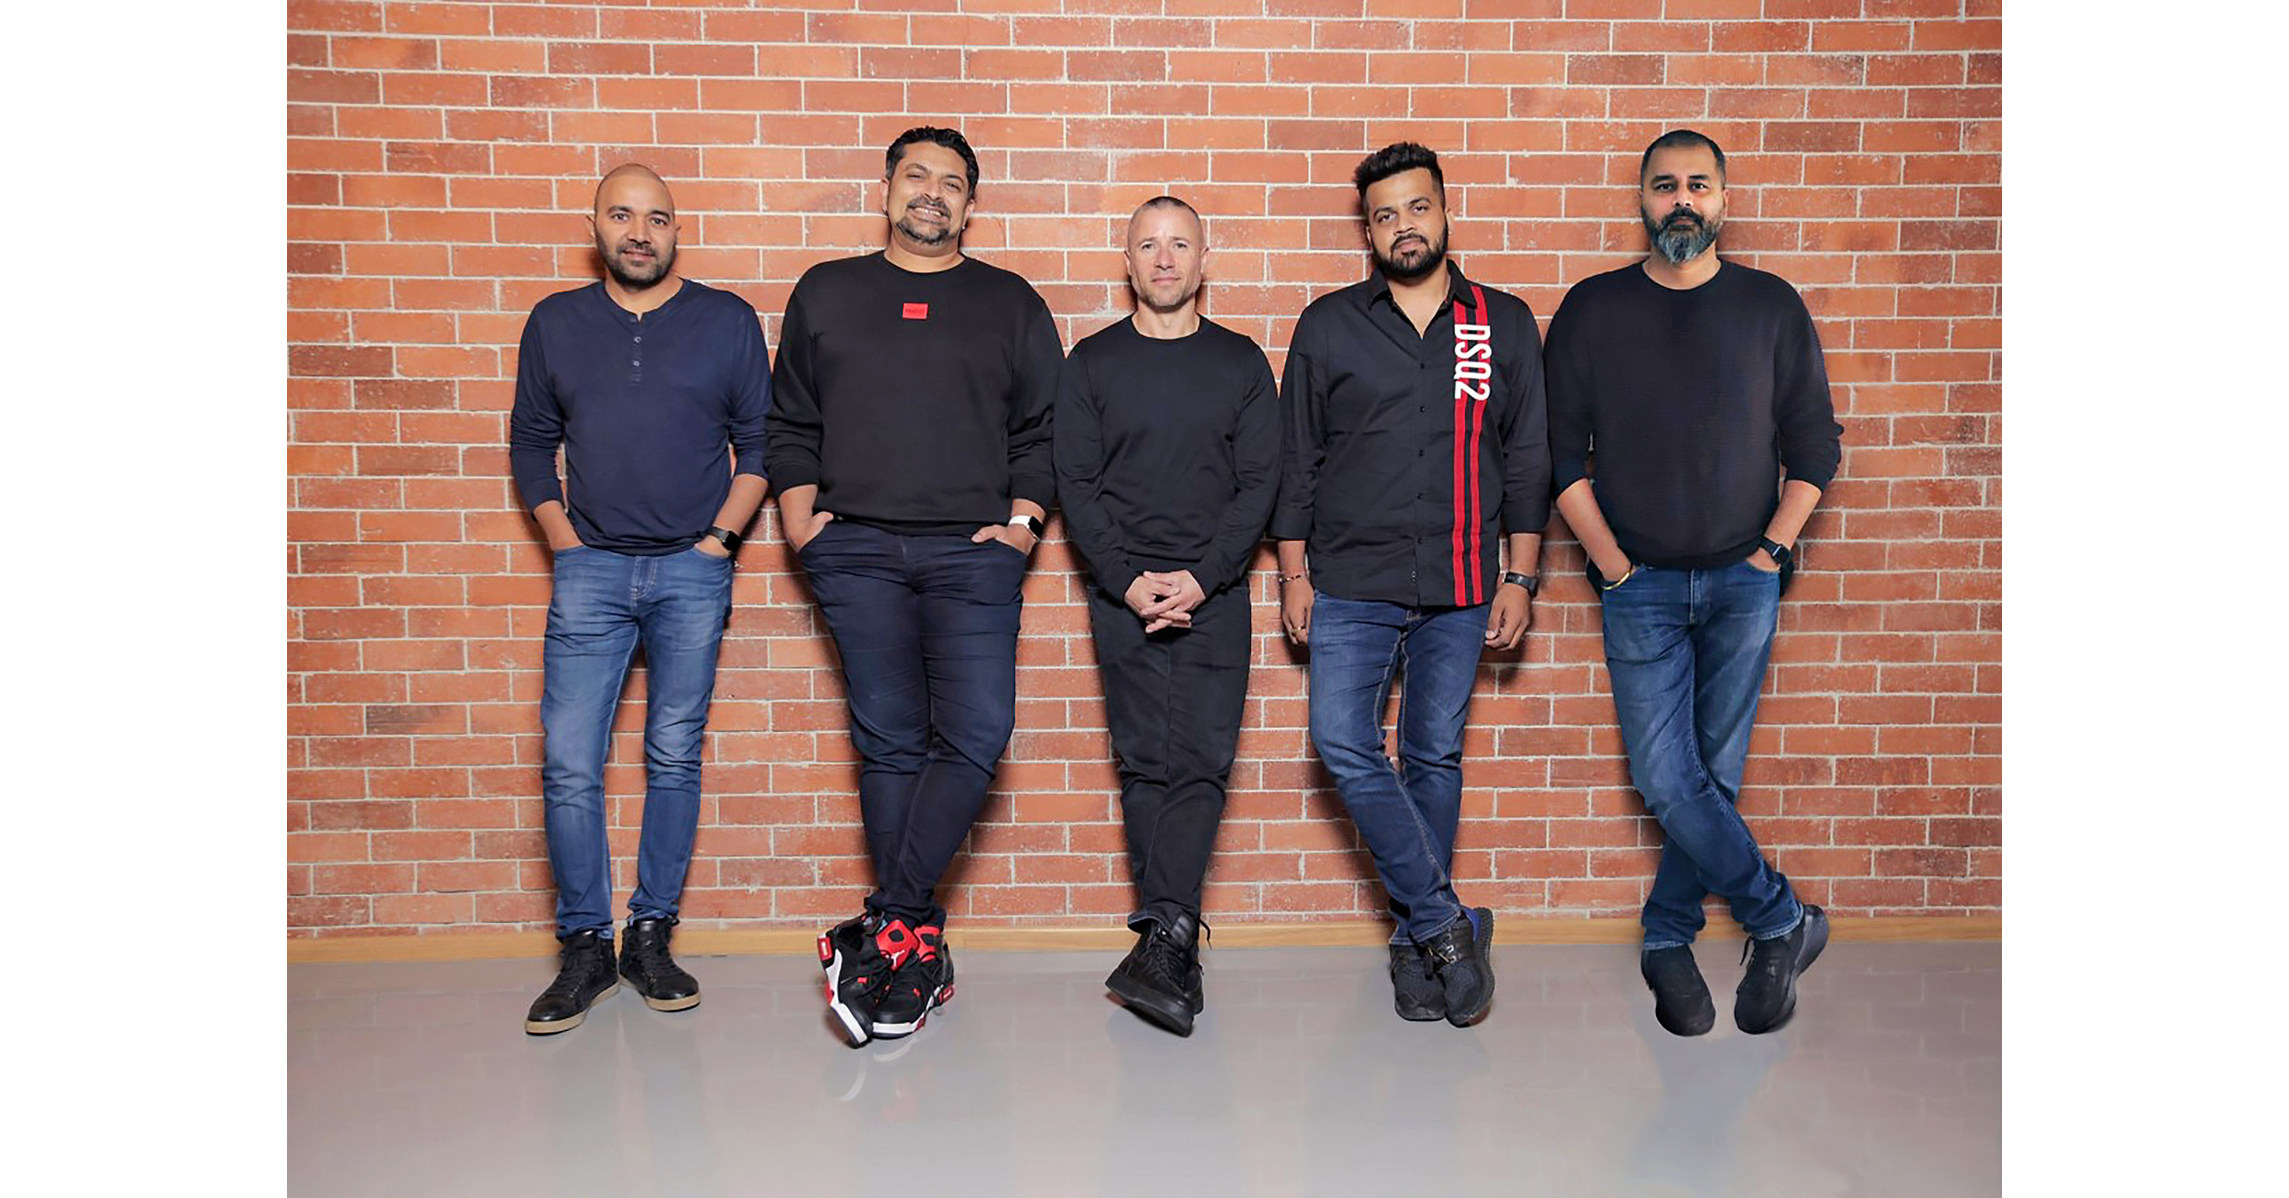 Xx Nepali Badshah Video - UNIVERSAL MUSIC INDIA ACQUIRES MAJORITY STAKE IN TM VENTURES, A LEADING  INDIAN MUSIC & ENTERTAINMENT COMPANY